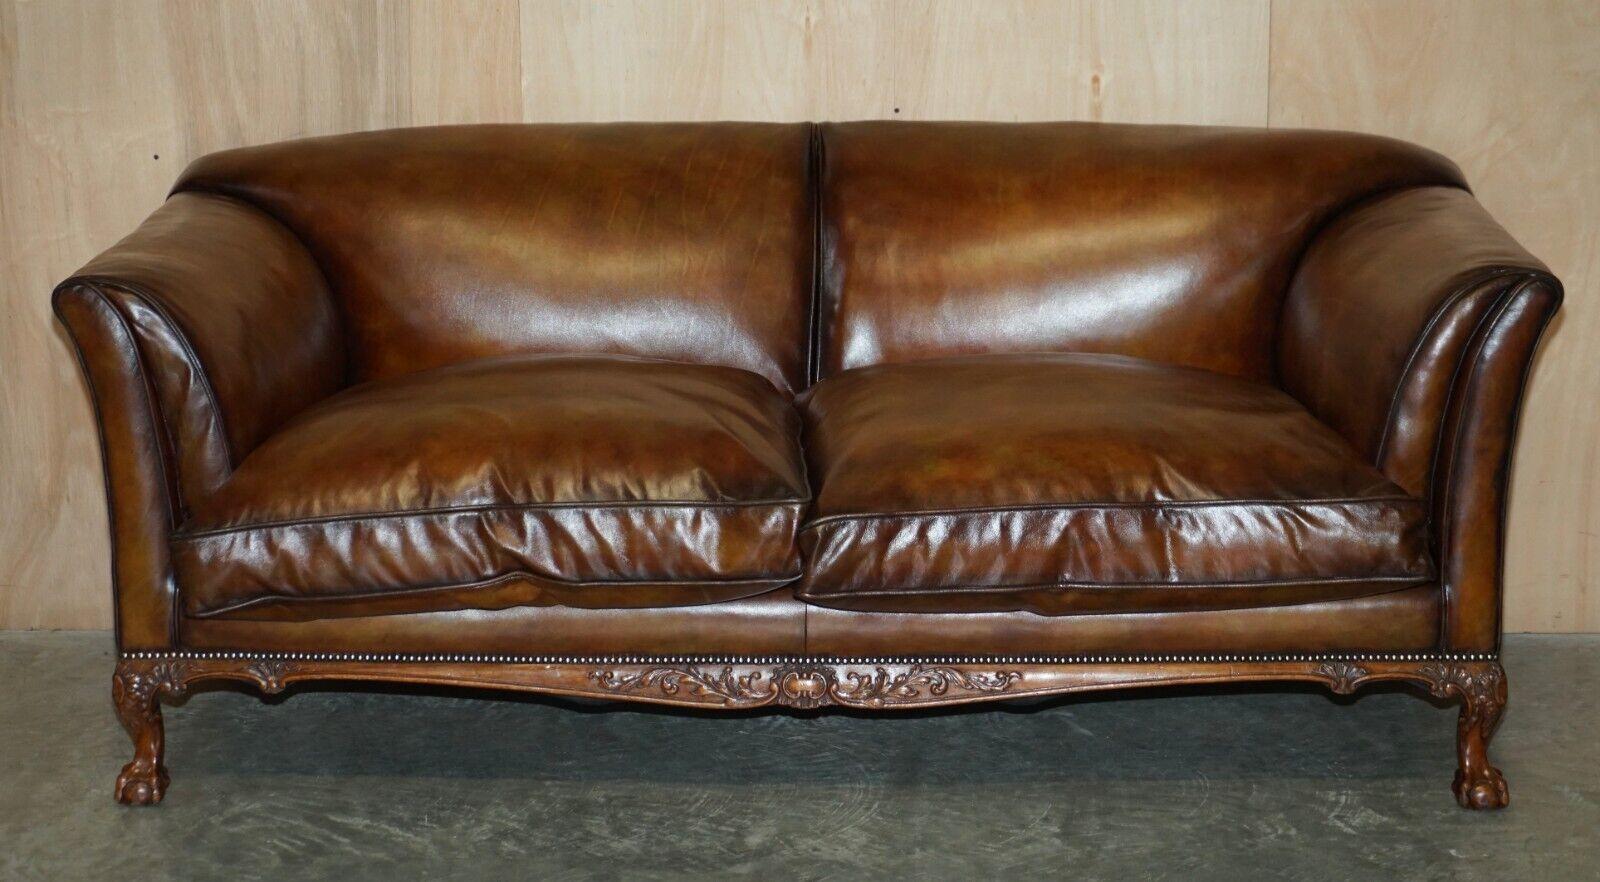 We are delighted to offer for sale this very fine, fully restored Howard & Son’s Berners Street London, large Baring sofa upholstered with new Fully Aniline cattle hide leather with hand carved Claw & Ball feet

This is pretty much the finest sofa